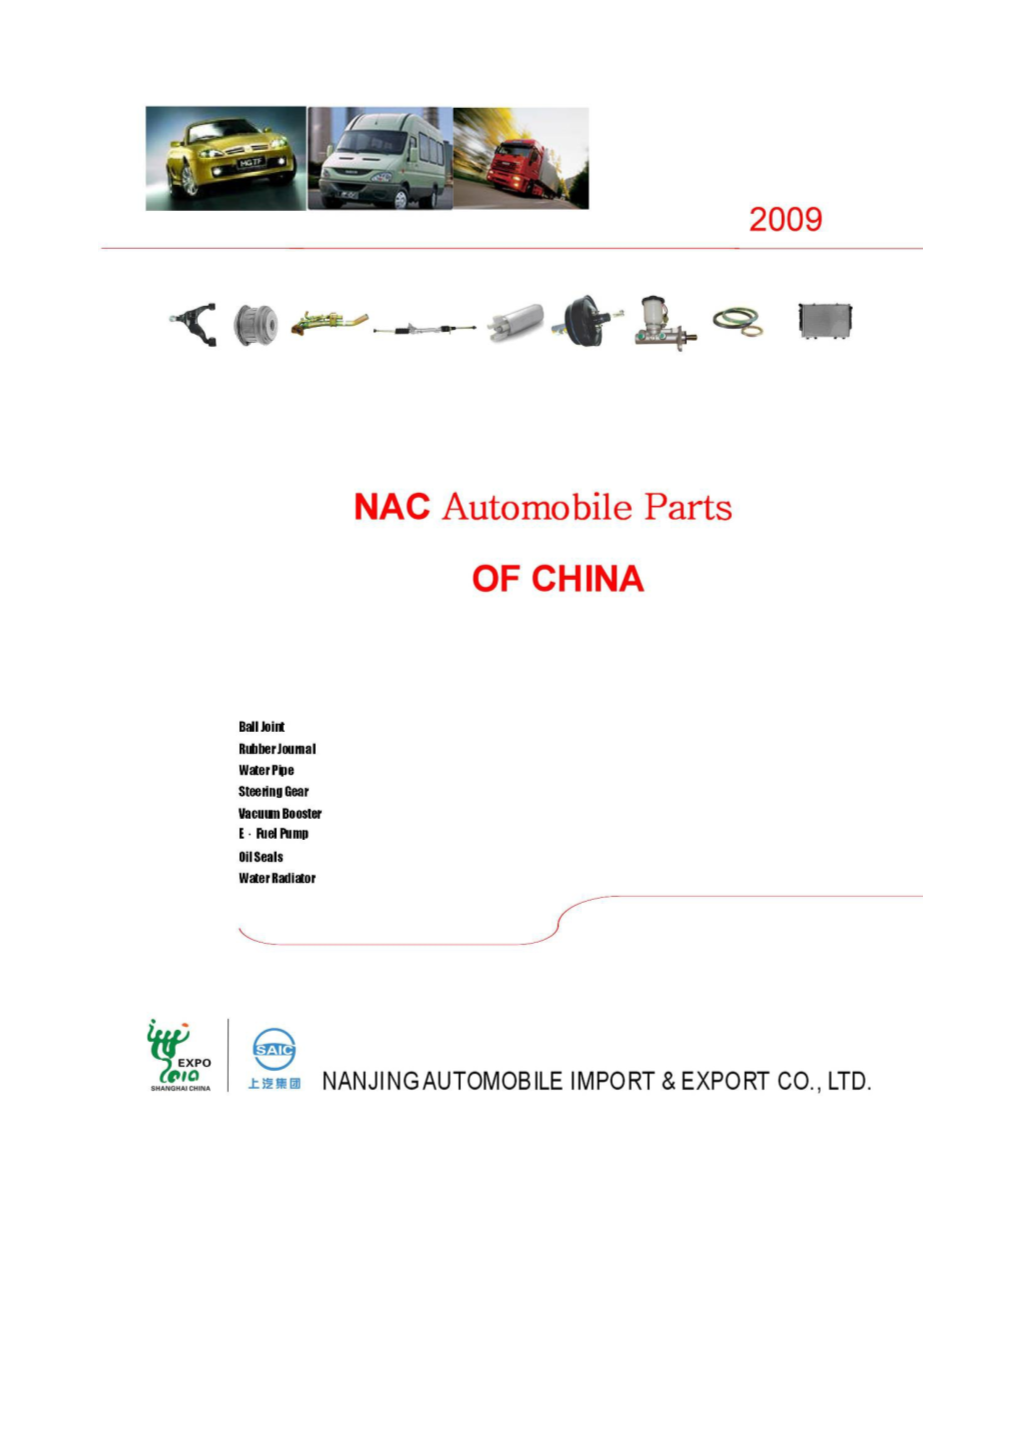 NAIEC Specializes in the Foreign Trade Business of Automobile, Mechanical & Electric Equipment